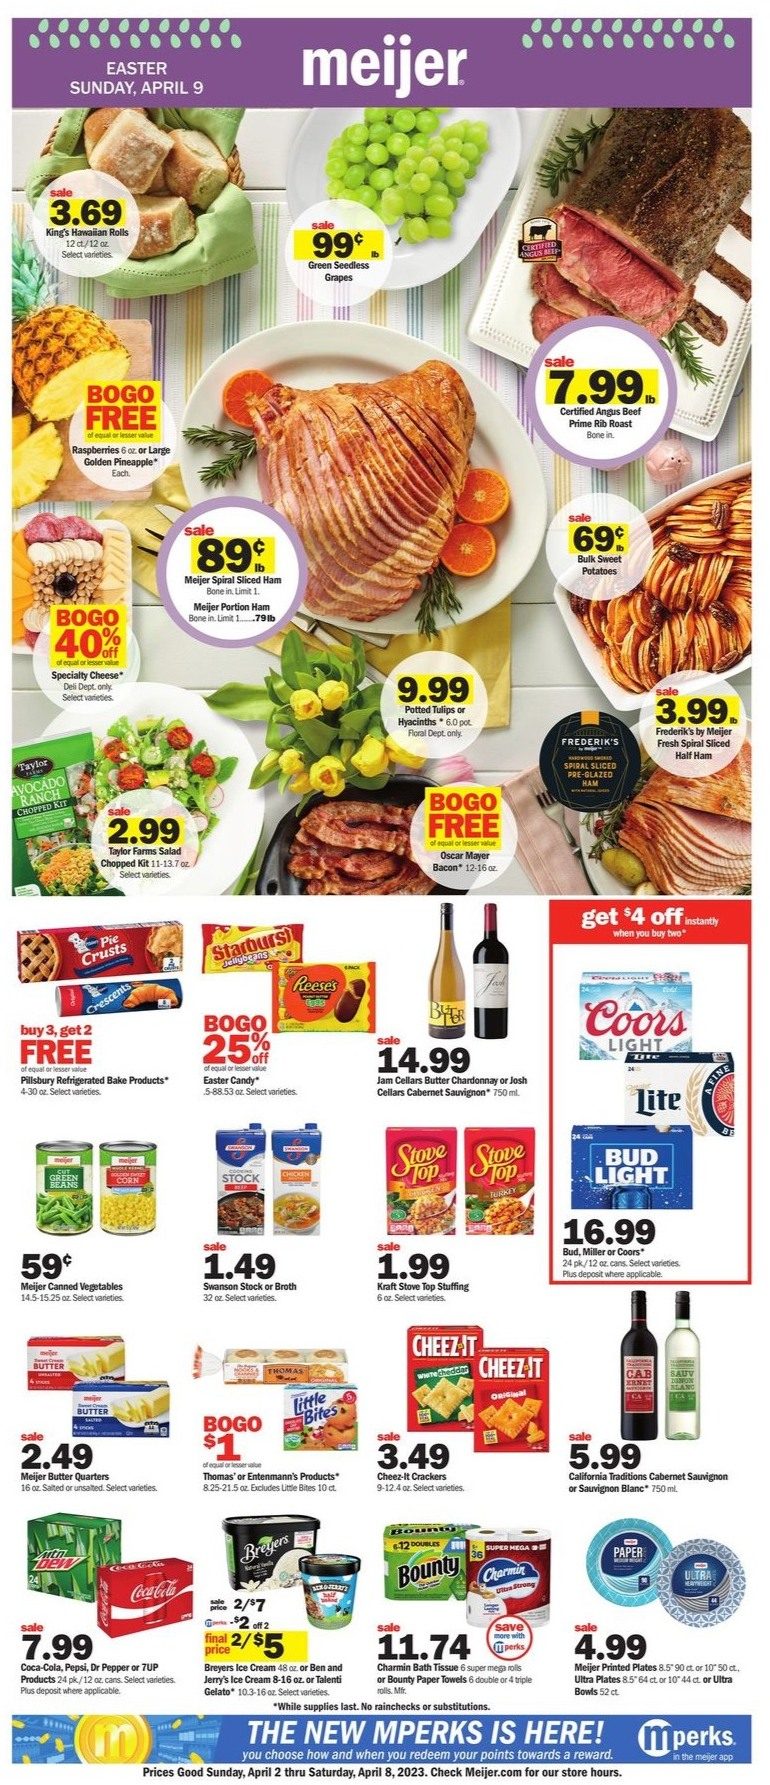 Meijer Weekly Ad Easter 2nd – 8th April 2023 Page 1